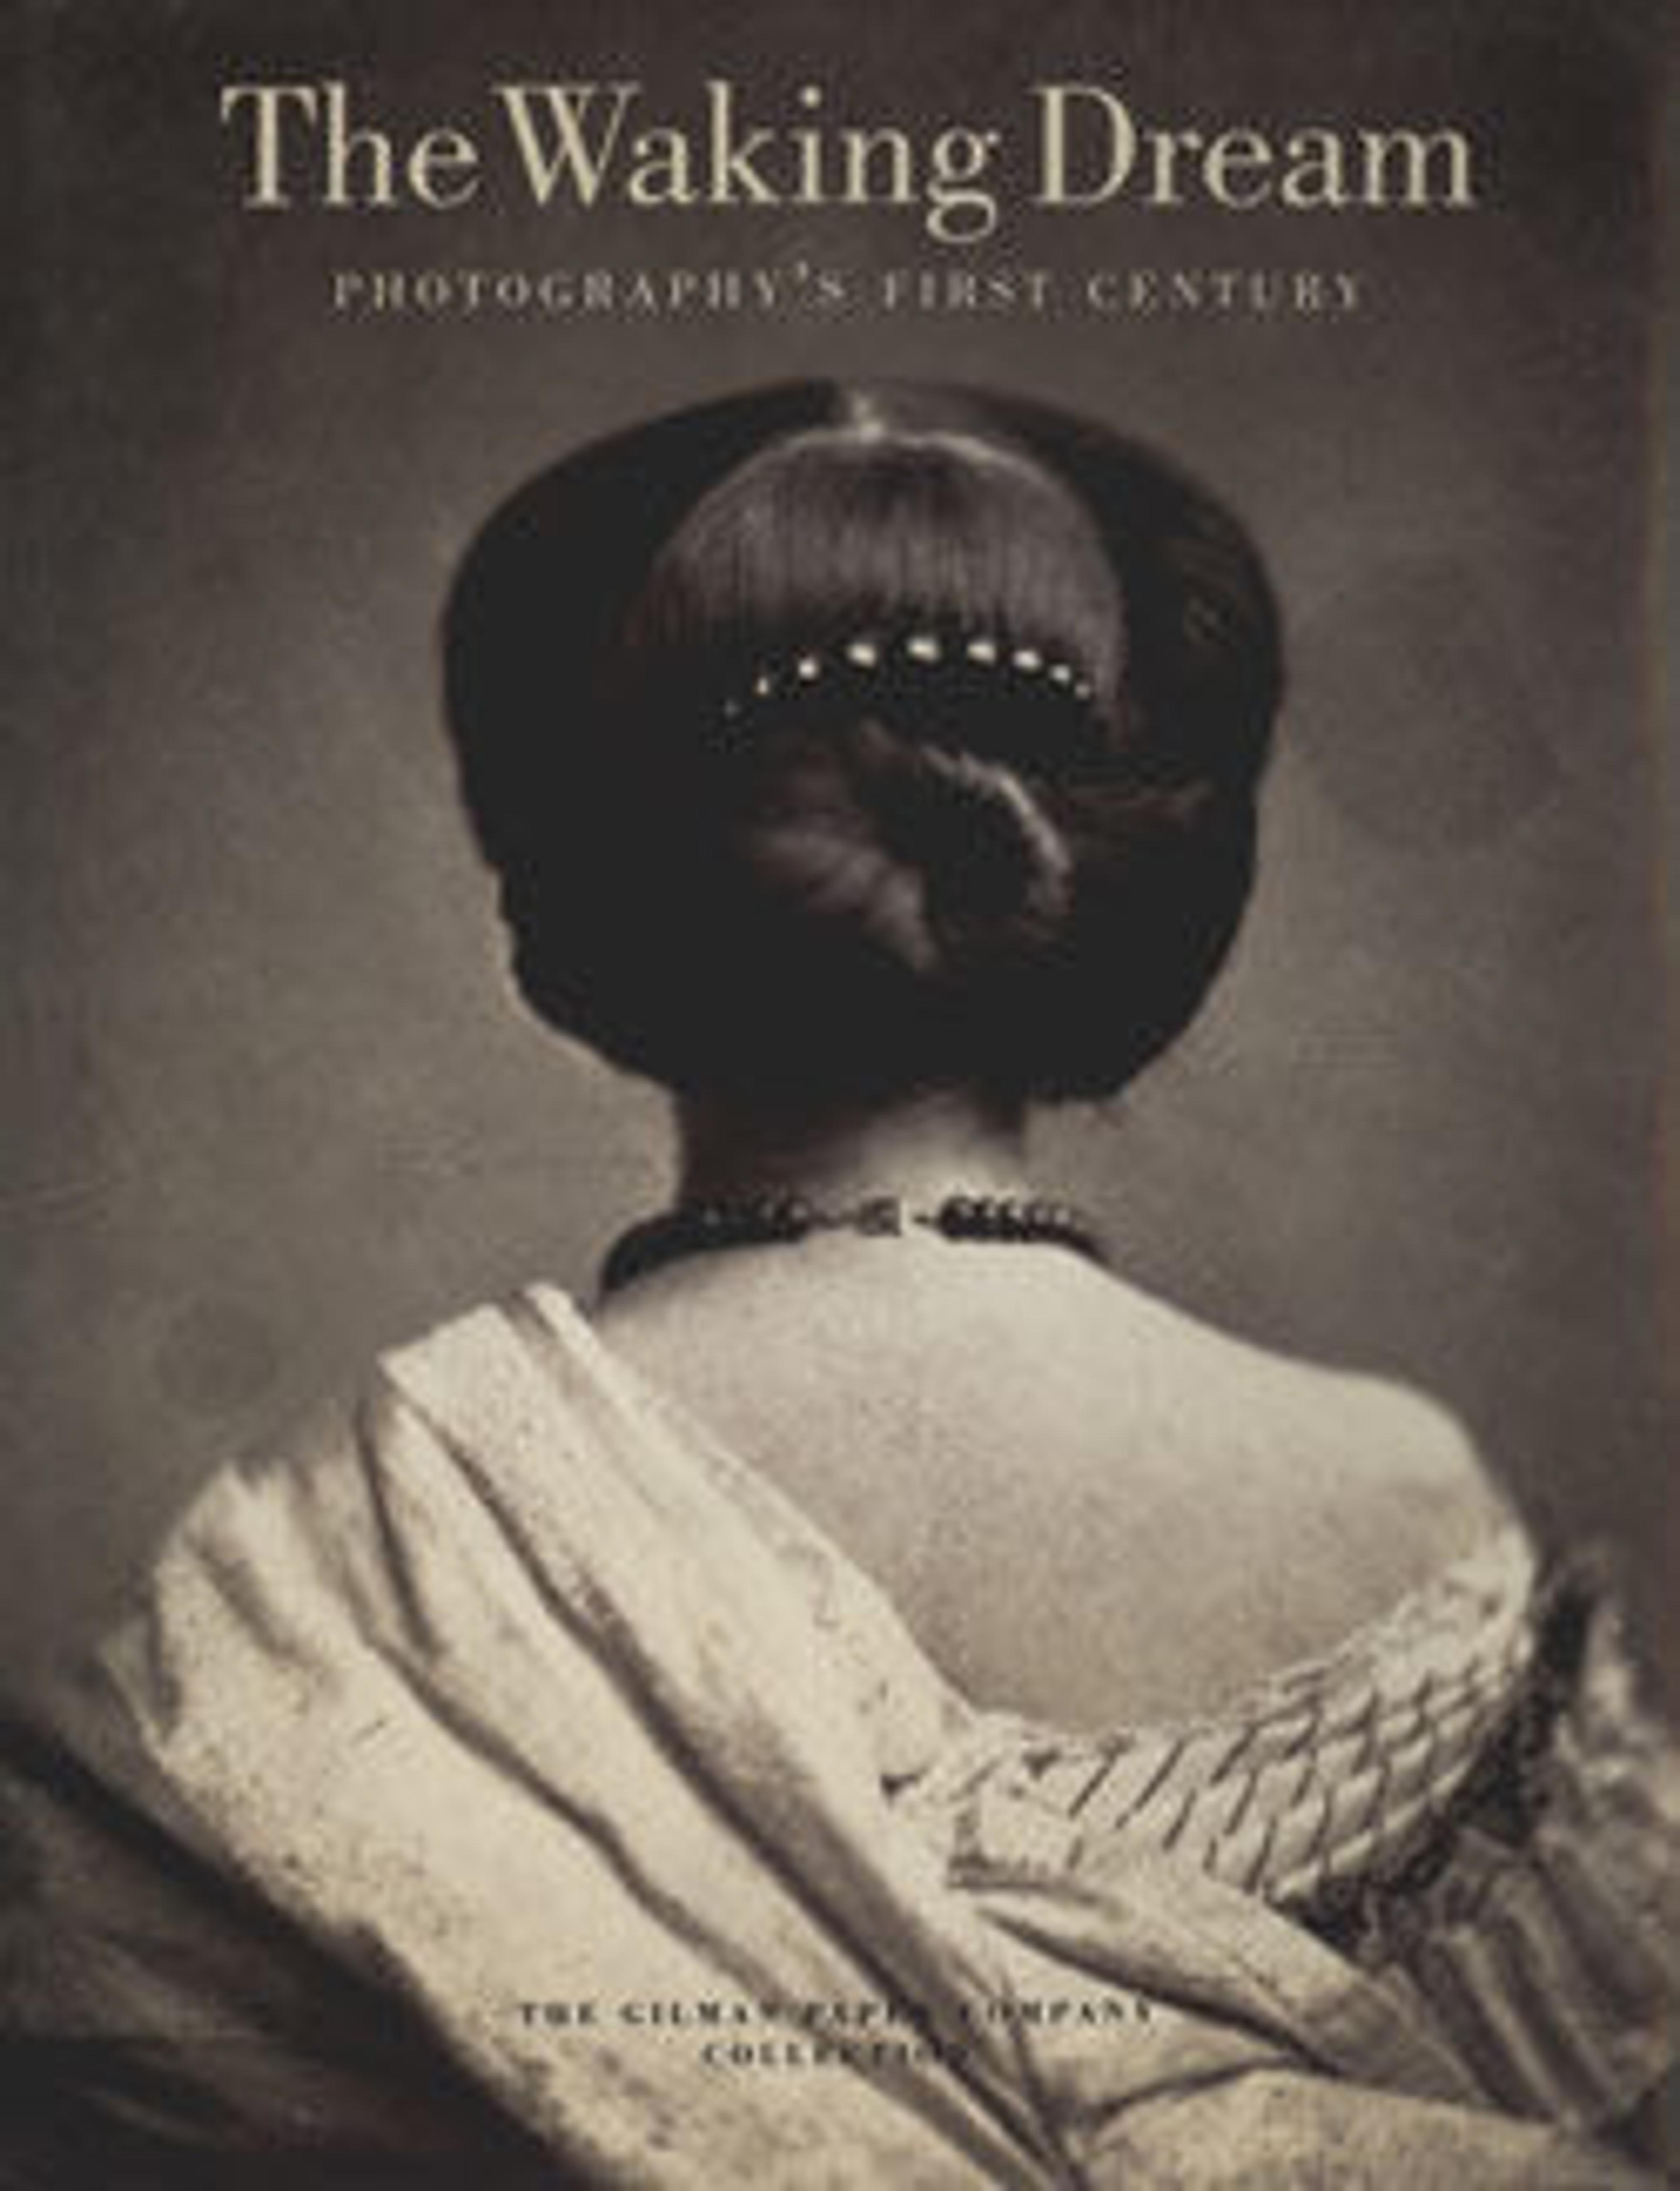 The Waking Dream: Photography's First Century. Selections from the Gilman Paper Company Collection